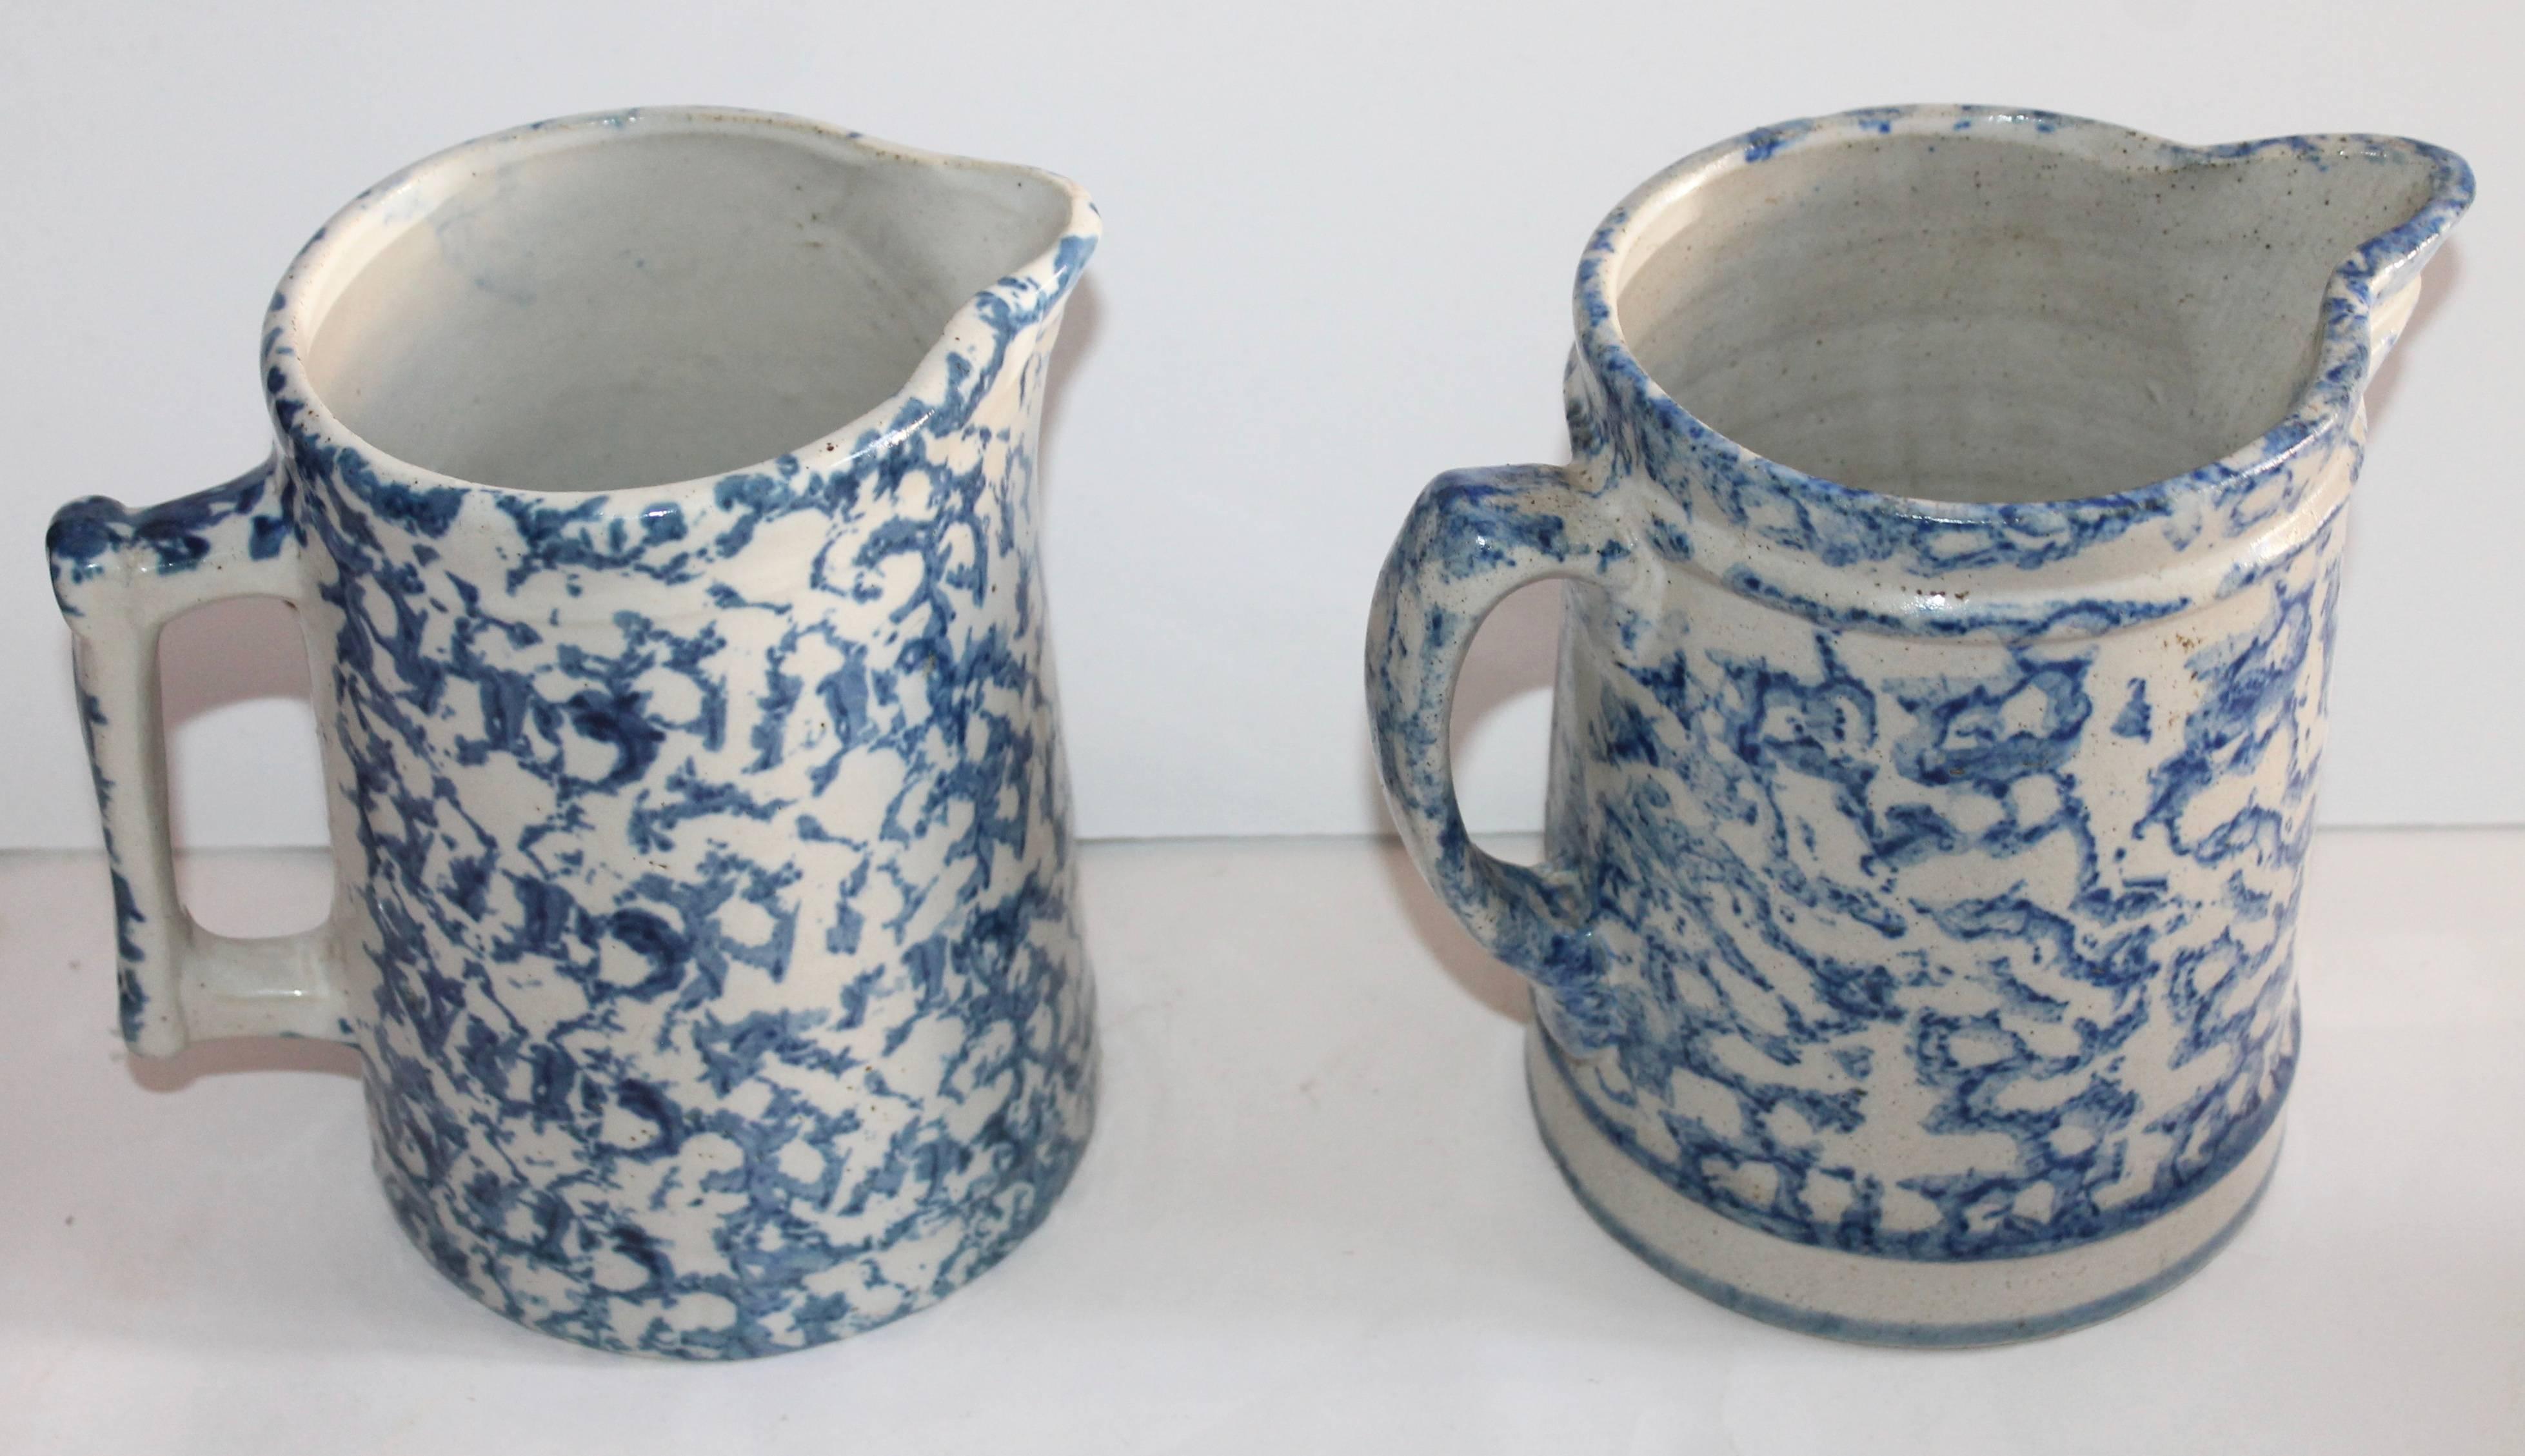 American Pair of 19th Century Sponge Ware Pottery Pitchers For Sale